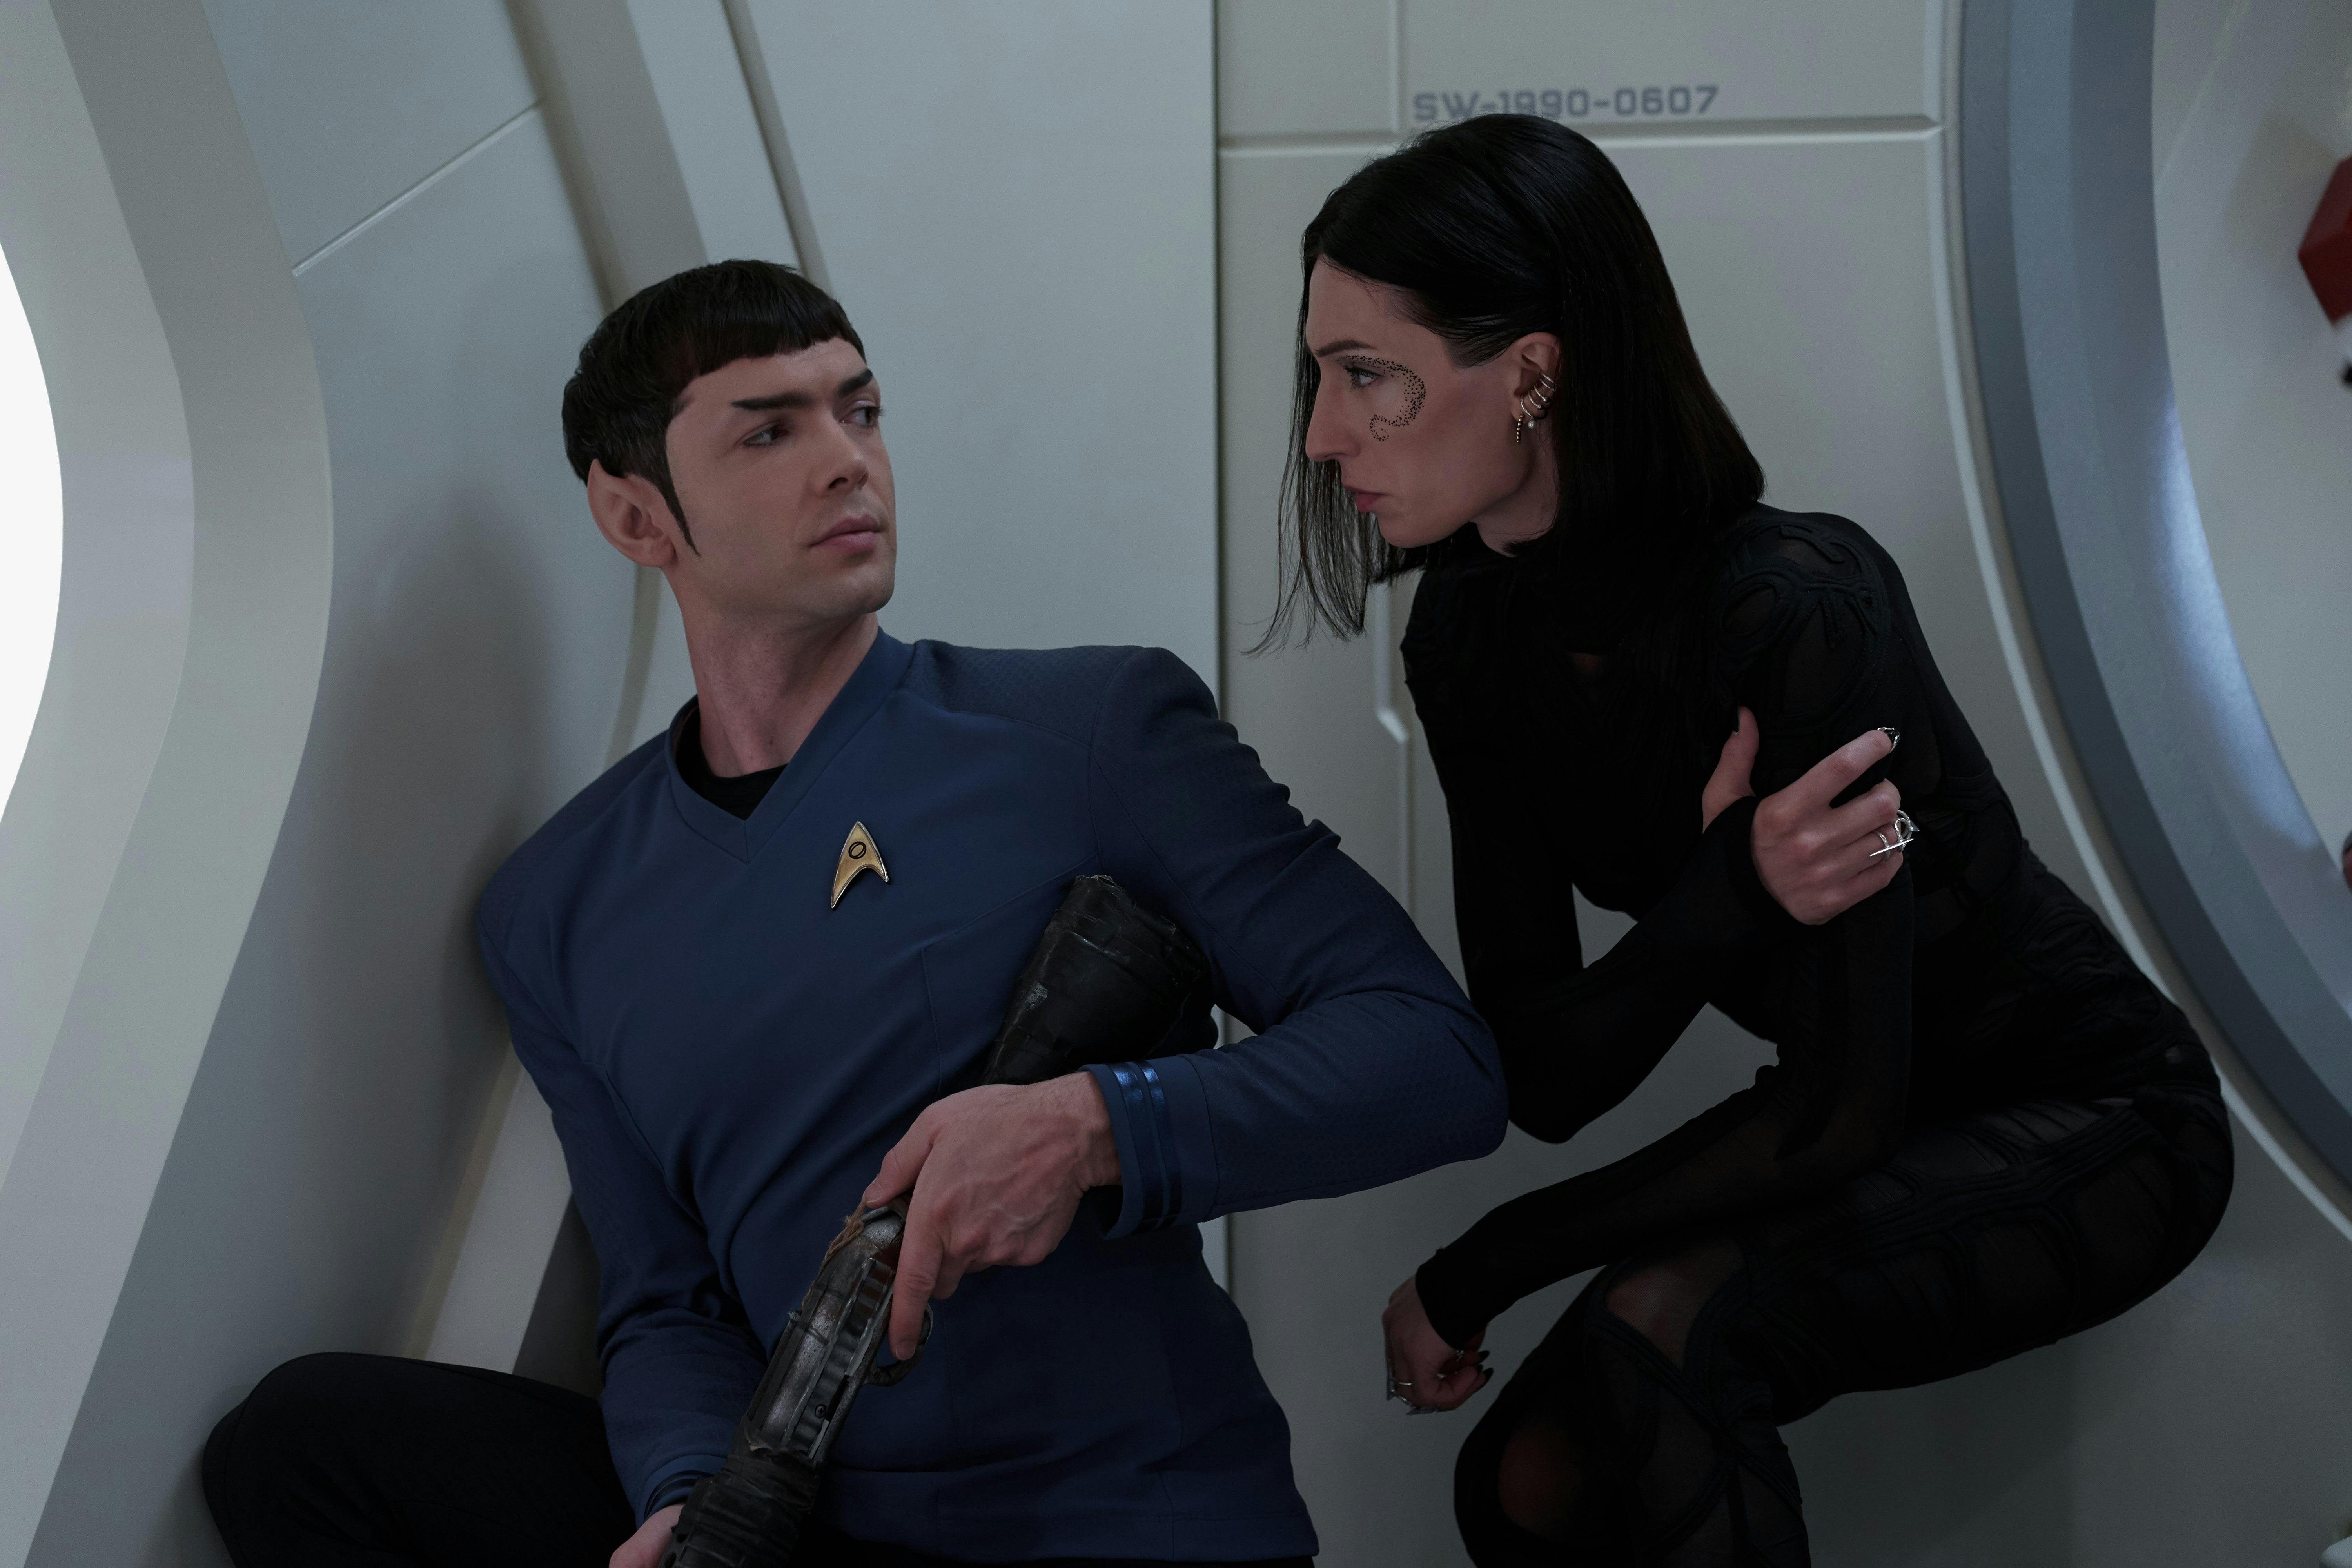 Spock (Strange New Worlds) and a woman with short black hair look at each other. Spock is holding a phaser rifle, and the woman is holding her arm as if she is injured.